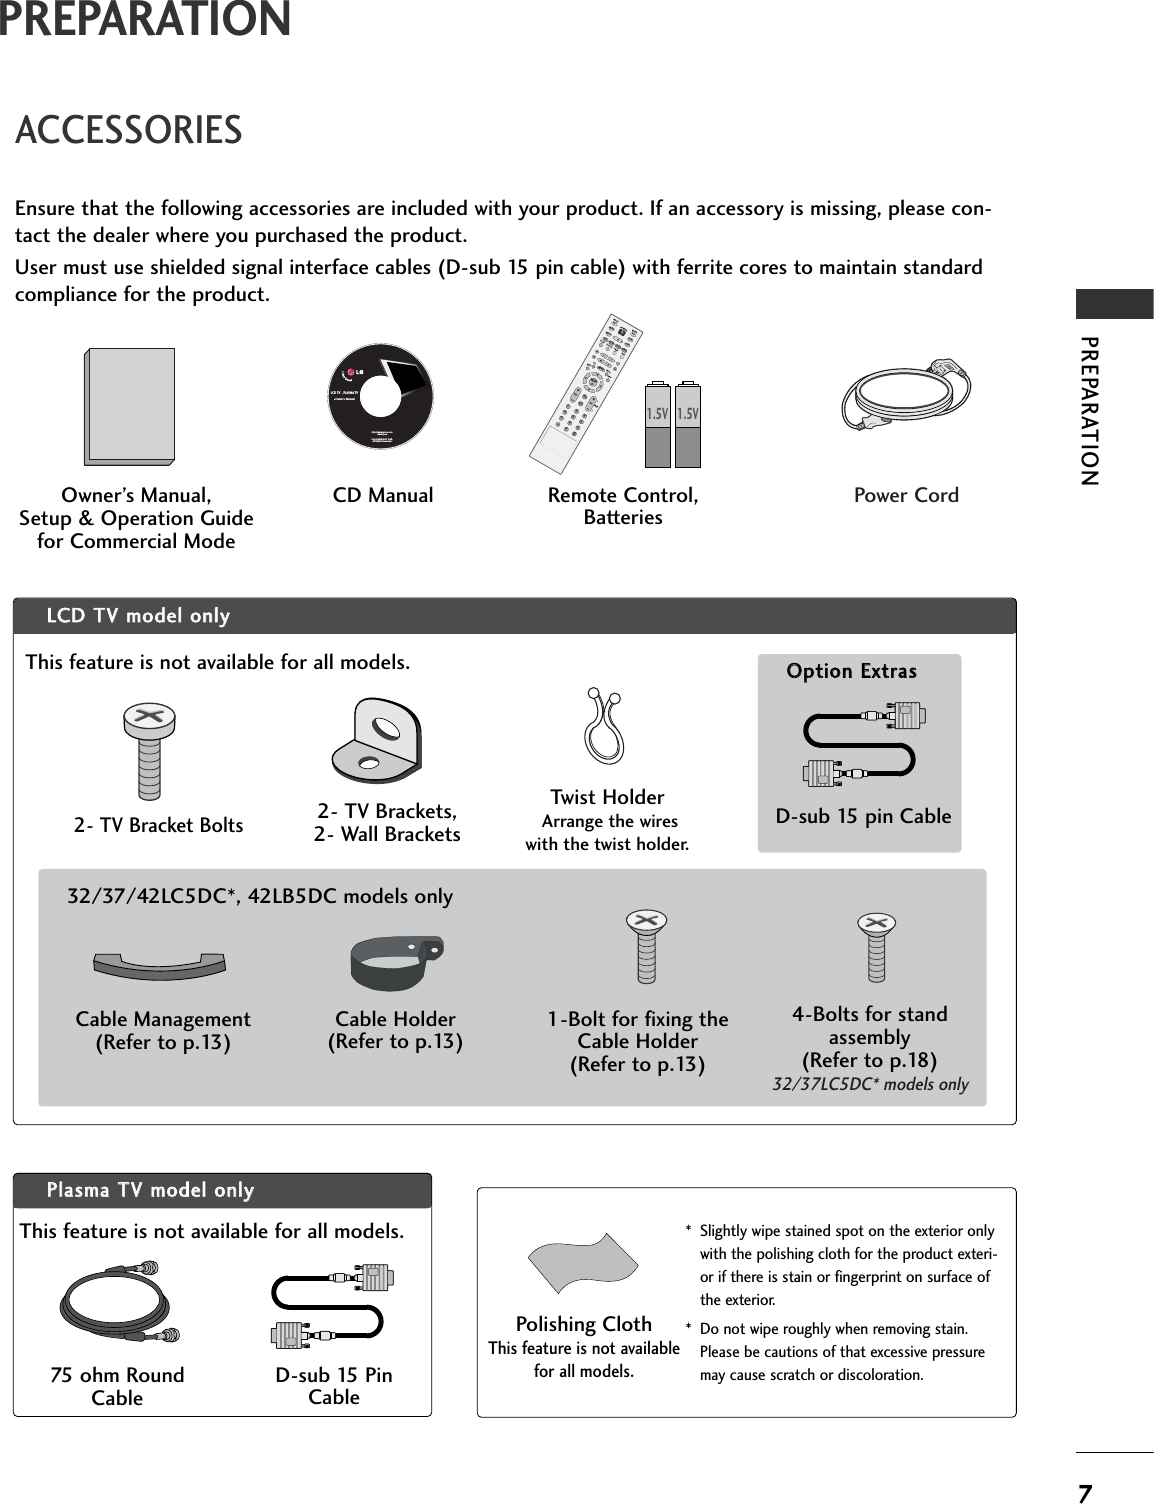 PREPARATION7PREPARATIONACCESSORIESEnsure that the following accessories are included with your product. If an accessory is missing, please con-tact the dealer where you purchased the product. User must use shielded signal interface cables (D-sub 15 pin cable) with ferrite cores to maintain standardcompliance for the product.Owner’s Manual, Setup &amp; Operation Guidefor Commercial ModeENTER TVINPUT  MODEDVDMULTIEXITLEZ SOUNDINFOSWAPEZ PICTIMERMUTECHSAPCCRATIOMENUVCRPOWER2369PIPPIP CH - PIP CH +PIP INPUTENTER TVTVINPUT  INPUT MODEDVDMULTIEXITVOLEZ SOUNDINFOSWAPEZ PICTIMERMUTECHSAPCCRATIOMENUVCRPOWER1234567890FLASHBACKPIPPIP CH - PIP CH +PIP INPUTPAGEPAGERemote Control,BatteriesPower CordPPllaassmmaa  TTVV  mmooddeell  oonnllyyCD ManualLCD TV    PLASMA TVOwner&apos;s Manualhttp://www.lgusa.comwww.lg.caCopyright© 2007 LGE,All Rights Reserved.75 ohm RoundCableD-sub 15 PinCableLLCCDD  TTVV  mmooddeell  oonnllyy4-Bolts for standassembly(Refer to p.18)32/37LC5DC* models onlyD-sub 15 pin CableOOppttiioonn  EExxttrraassTwist HolderArrange the wireswith the twist holder.2- TV Bracket Bolts2- TV Brackets, 2- Wall Brackets1.5V 1.5V1-Bolt for fixing theCable Holder(Refer to p.13)Cable Management(Refer to p.13)Cable Holder(Refer to p.13)32/37/42LC5DC*, 42LB5DC models only* Slightly wipe stained spot on the exterior onlywith the polishing cloth for the product exteri-or if there is stain or fingerprint on surface ofthe exterior.* Do not wipe roughly when removing stain.Please be cautions of that excessive pressuremay cause scratch or discoloration.Polishing ClothThis feature is not availablefor all models.This feature is not available for all models.This feature is not available for all models.